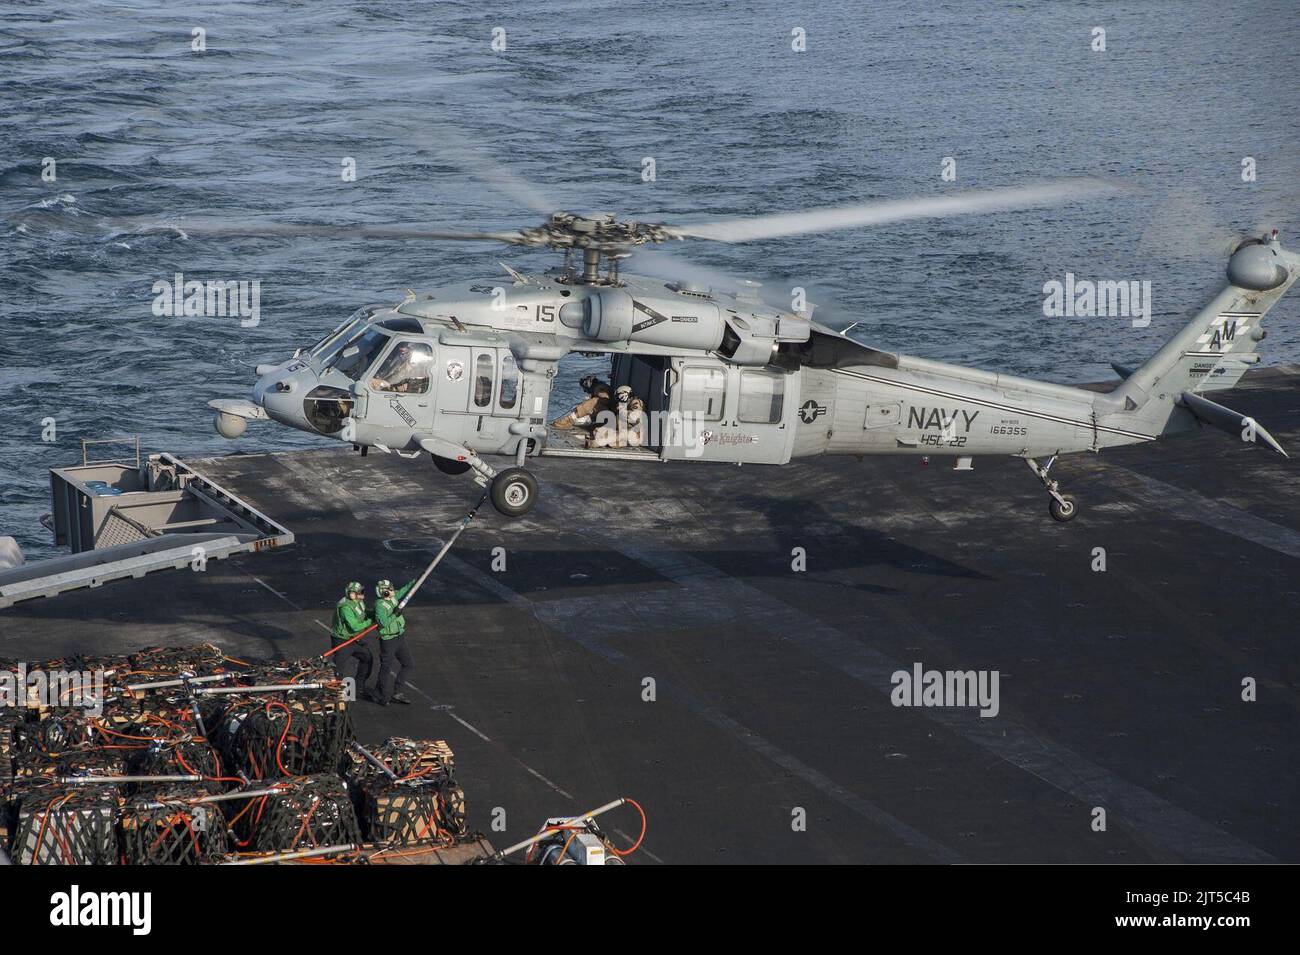 U.S. Sailors attach cargo to a Navy MH-60S Seahawk helicopter assigned to Helicopter Sea Combat Squadron (HSC) 22 on the flight deck of the aircraft carrier USS Harry S. Truman (CVN 75) during a replenishment 140307 Stock Photo